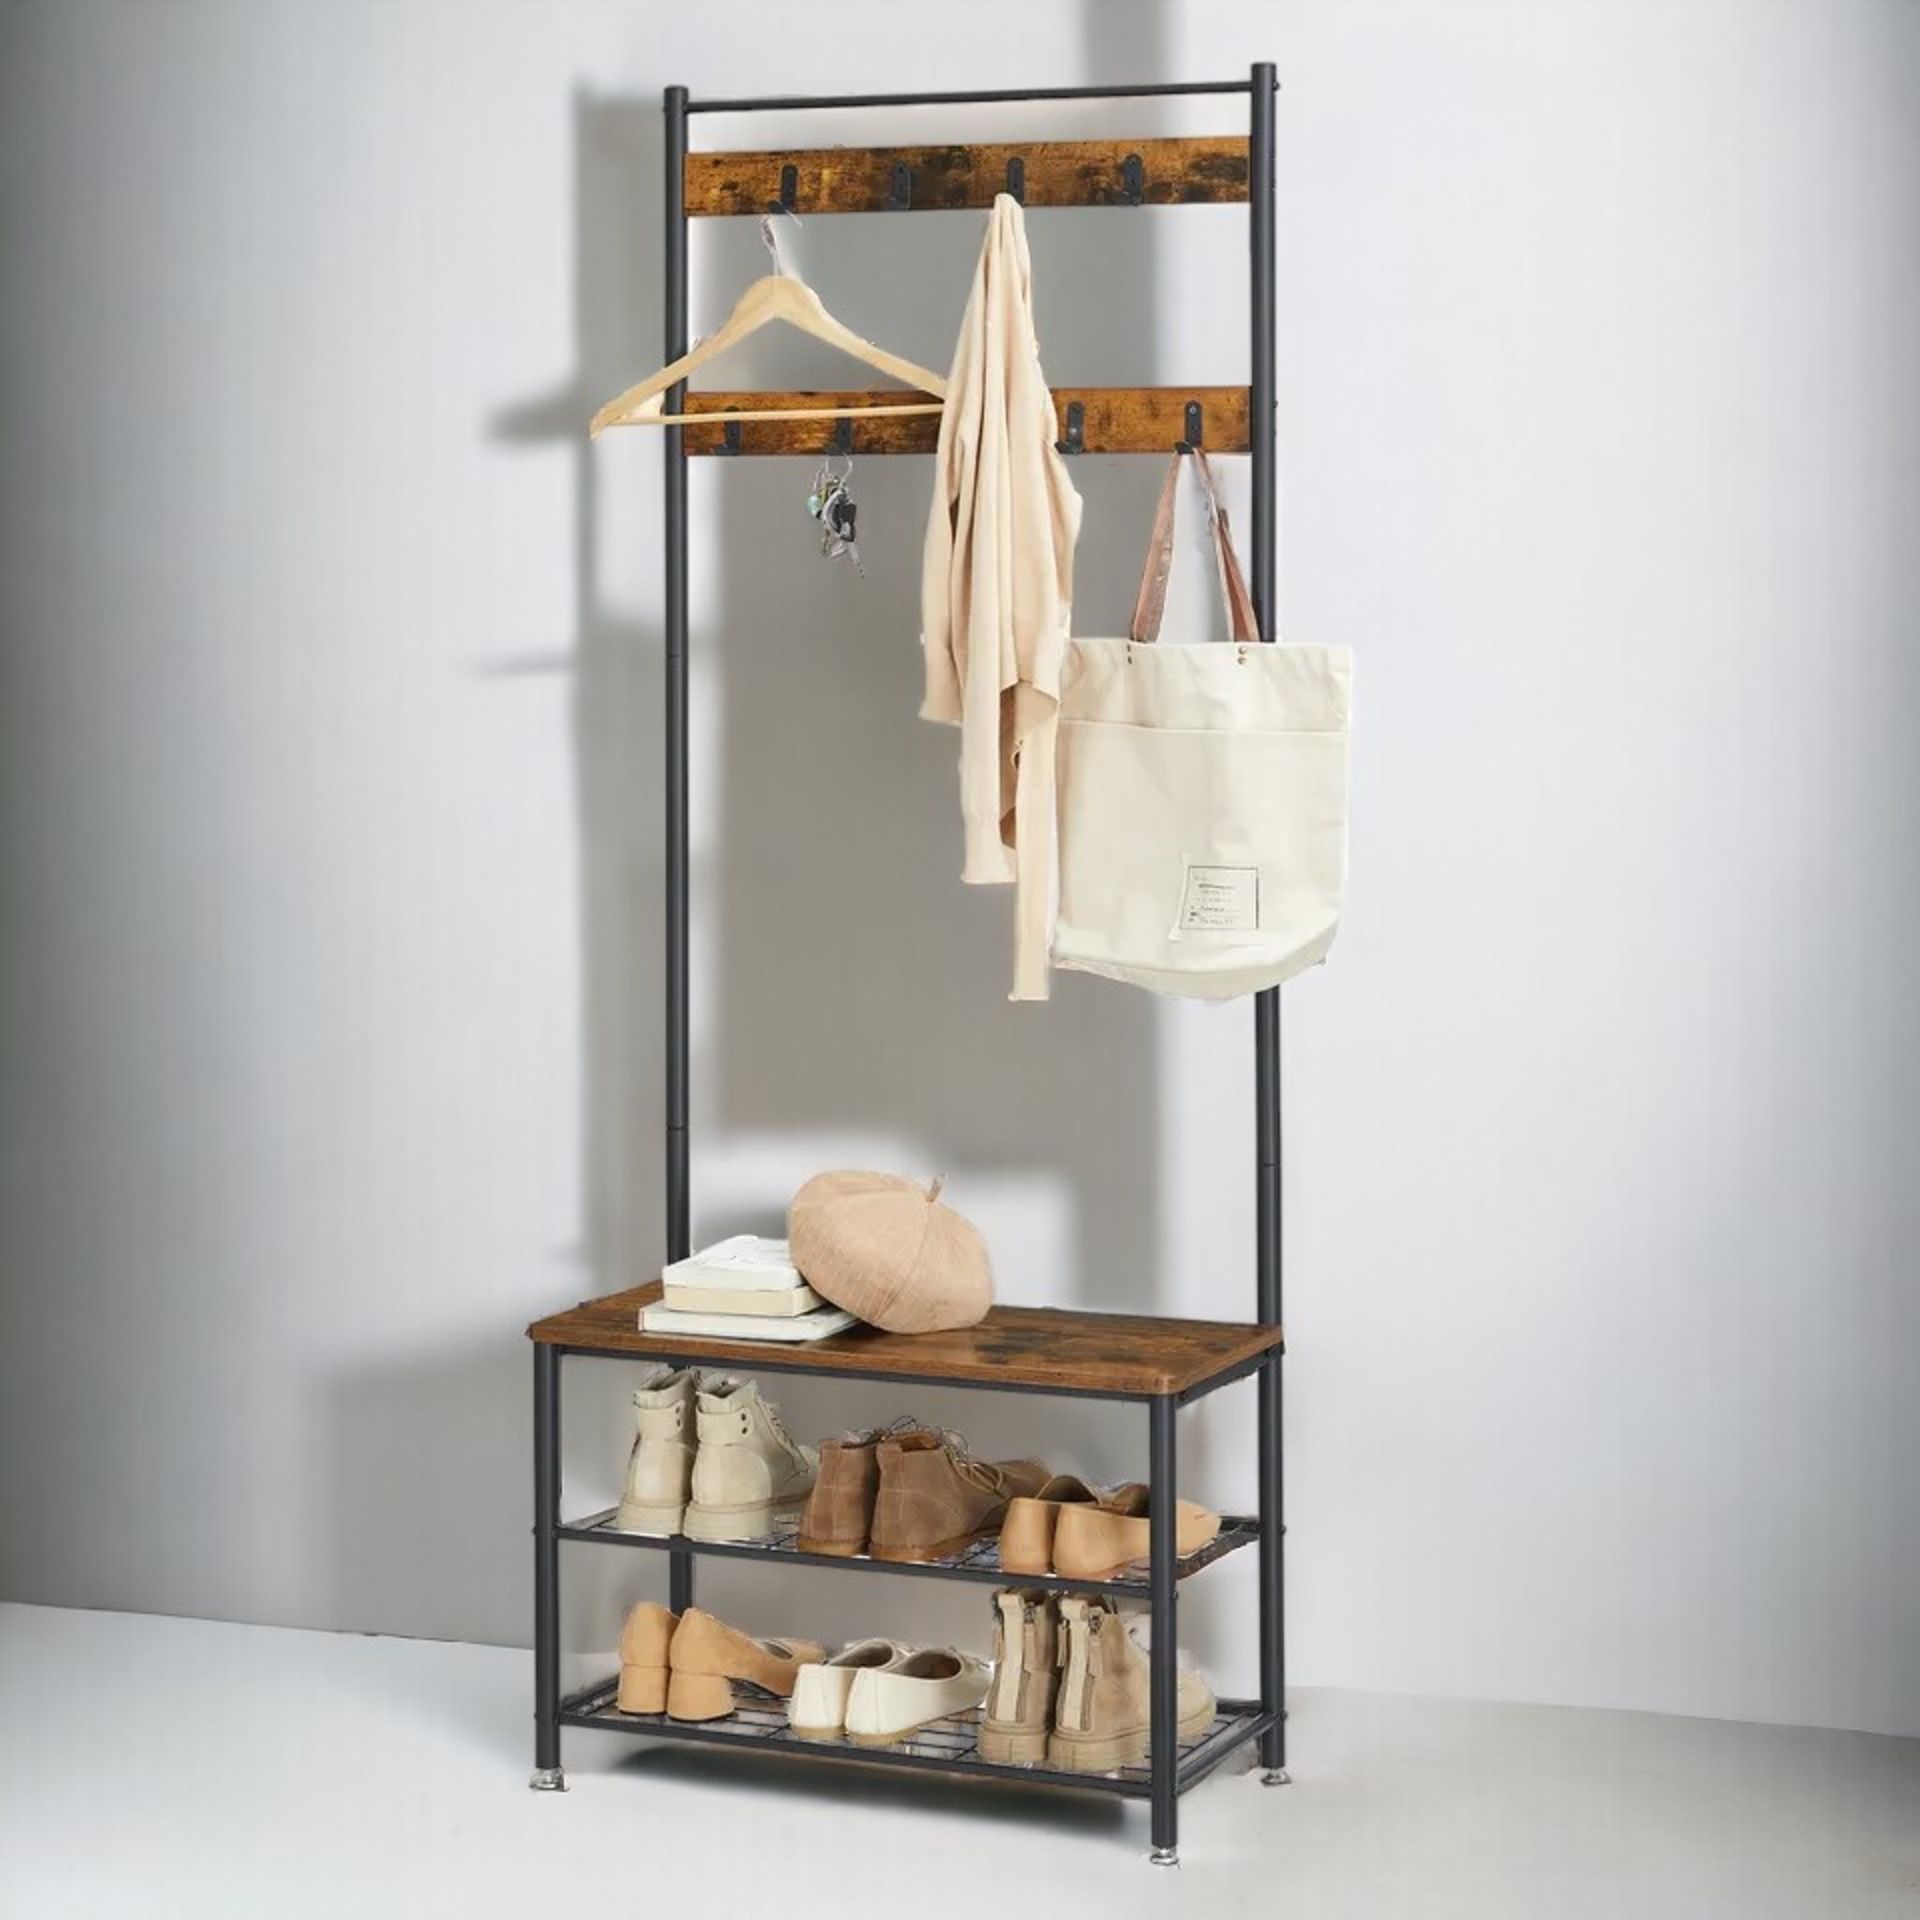 FREE DELIVERY - BRAND NEW HAT AND COAT STAND HALL TREE HALLWAY SHOE RACK STORAGE